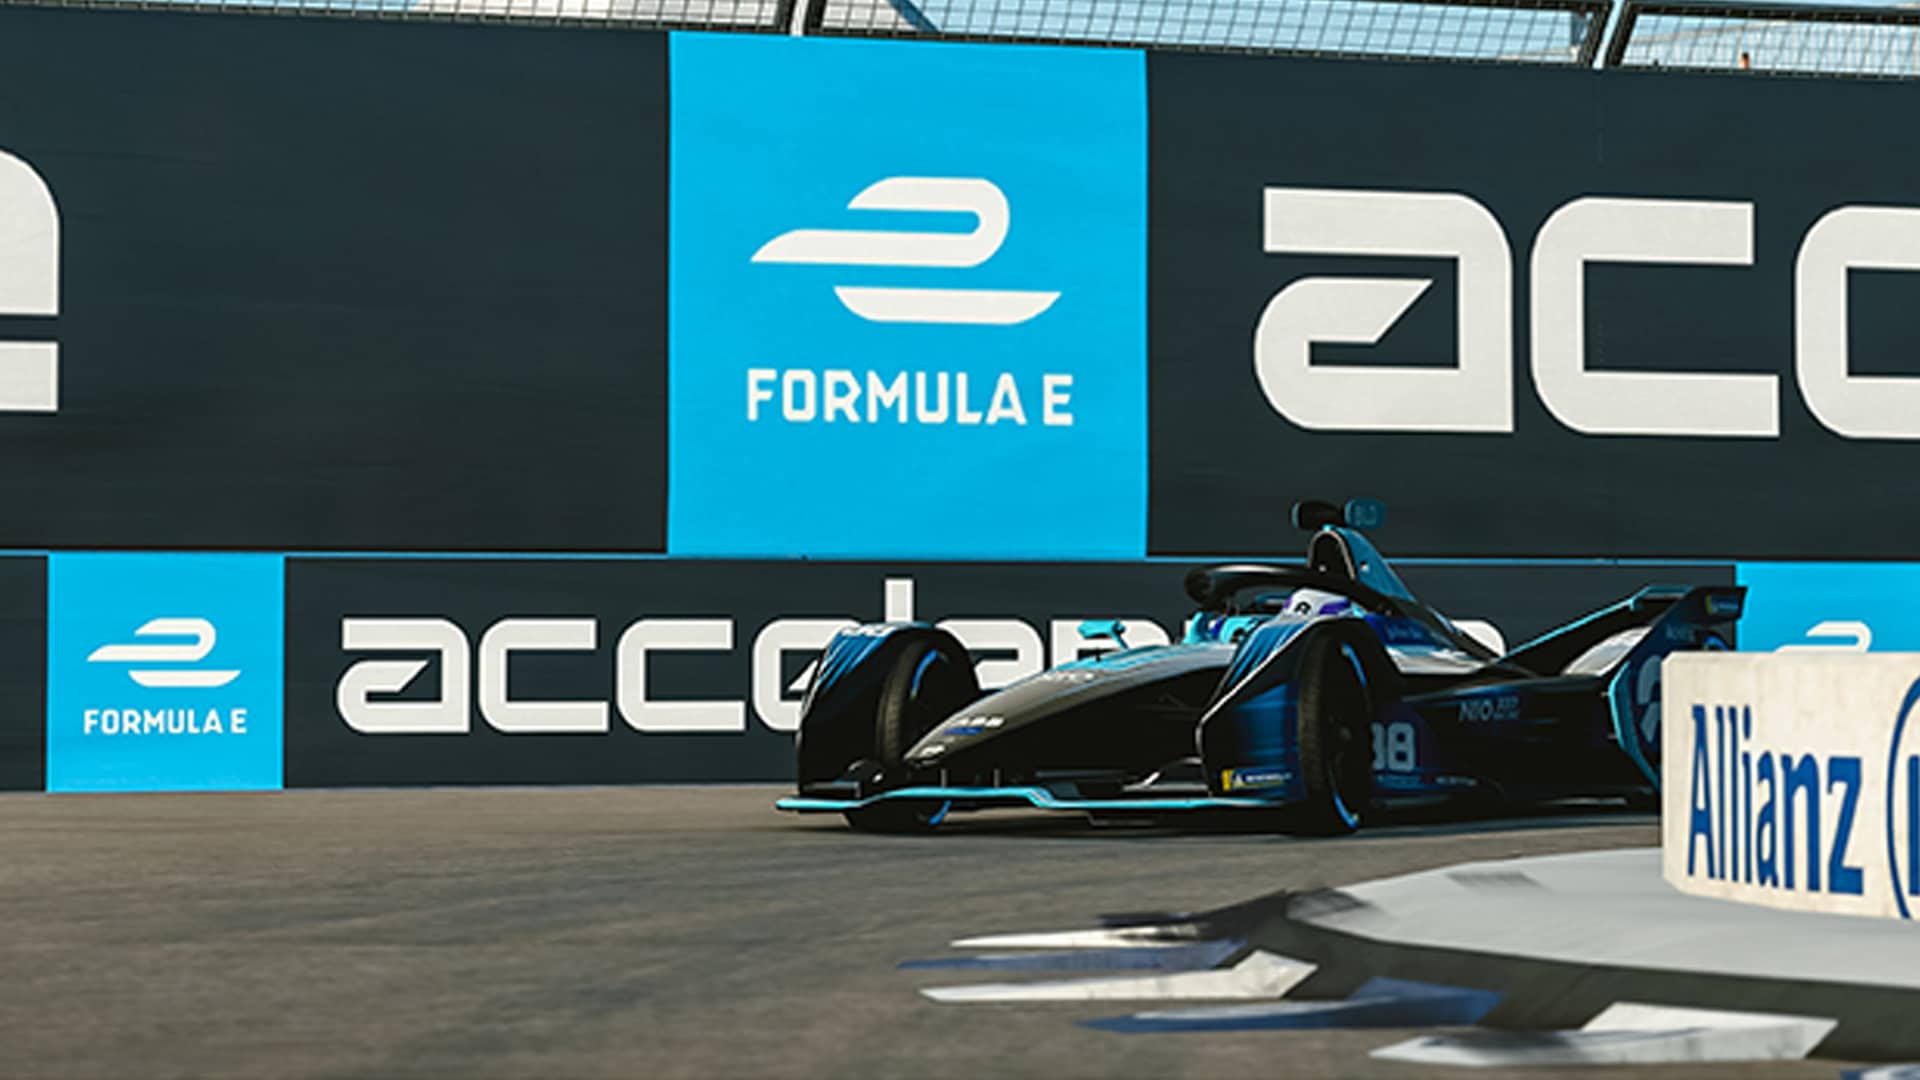 Formula E is back: Accelerate eSports competition, here are the details thumbnail